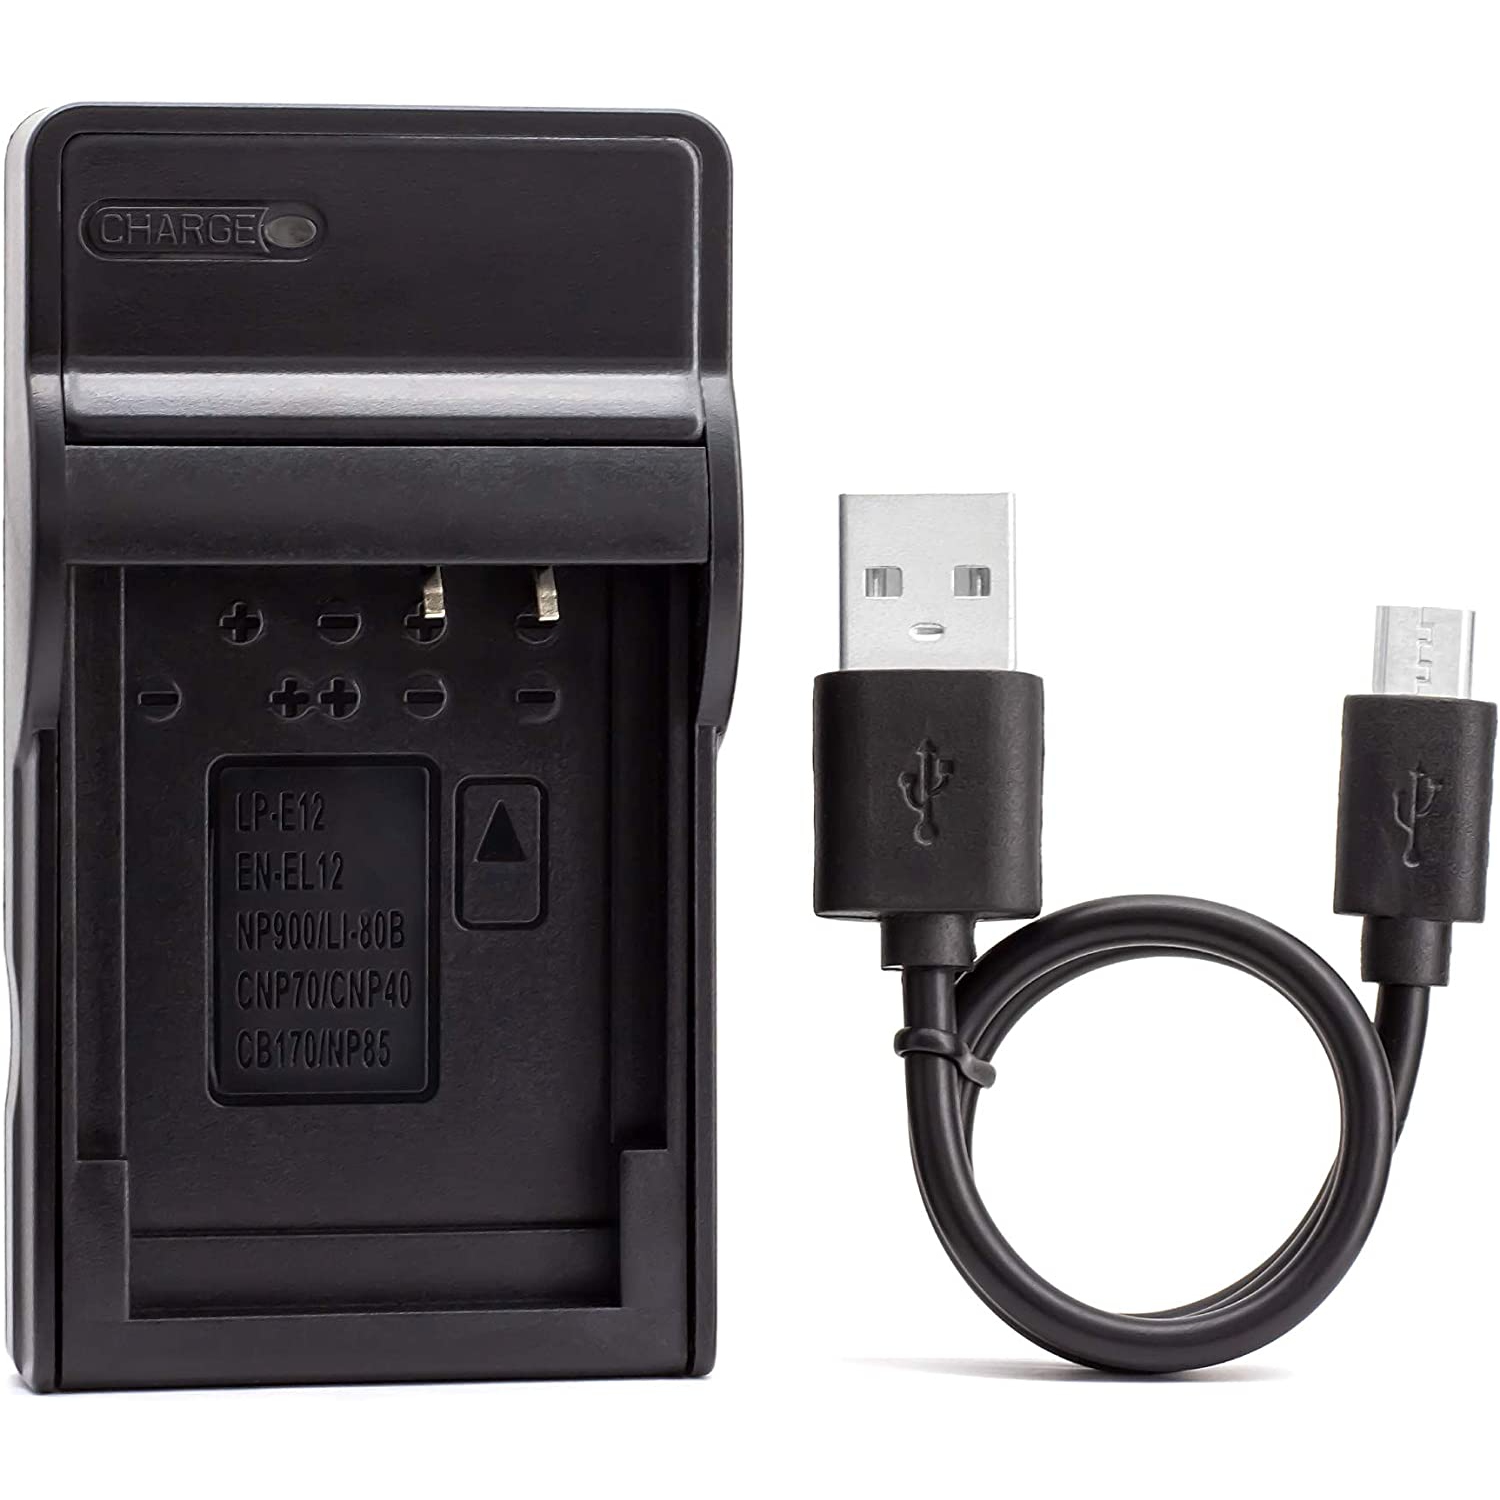 EN-EL12 USB Charger for Nikon Coolpix AW130, AW100, AW120, AW110, S6200, S6300, S8100, S8200, S9100, S9300, S9500,